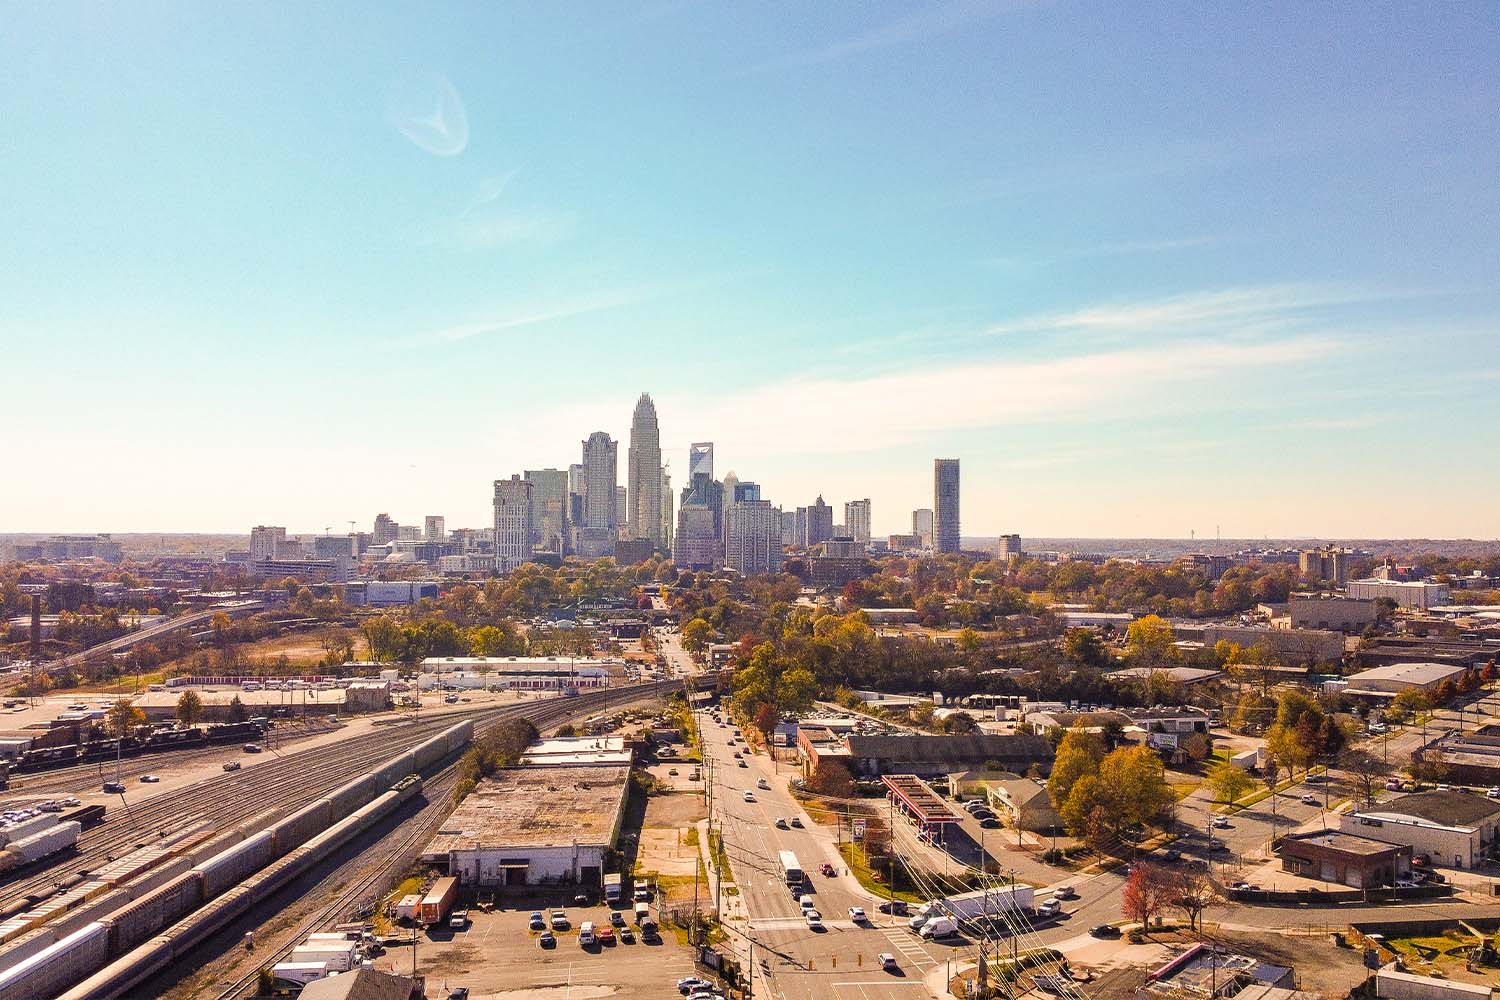 How To Plan The Perfect Weekend Trip To Charlotte, North Carolina